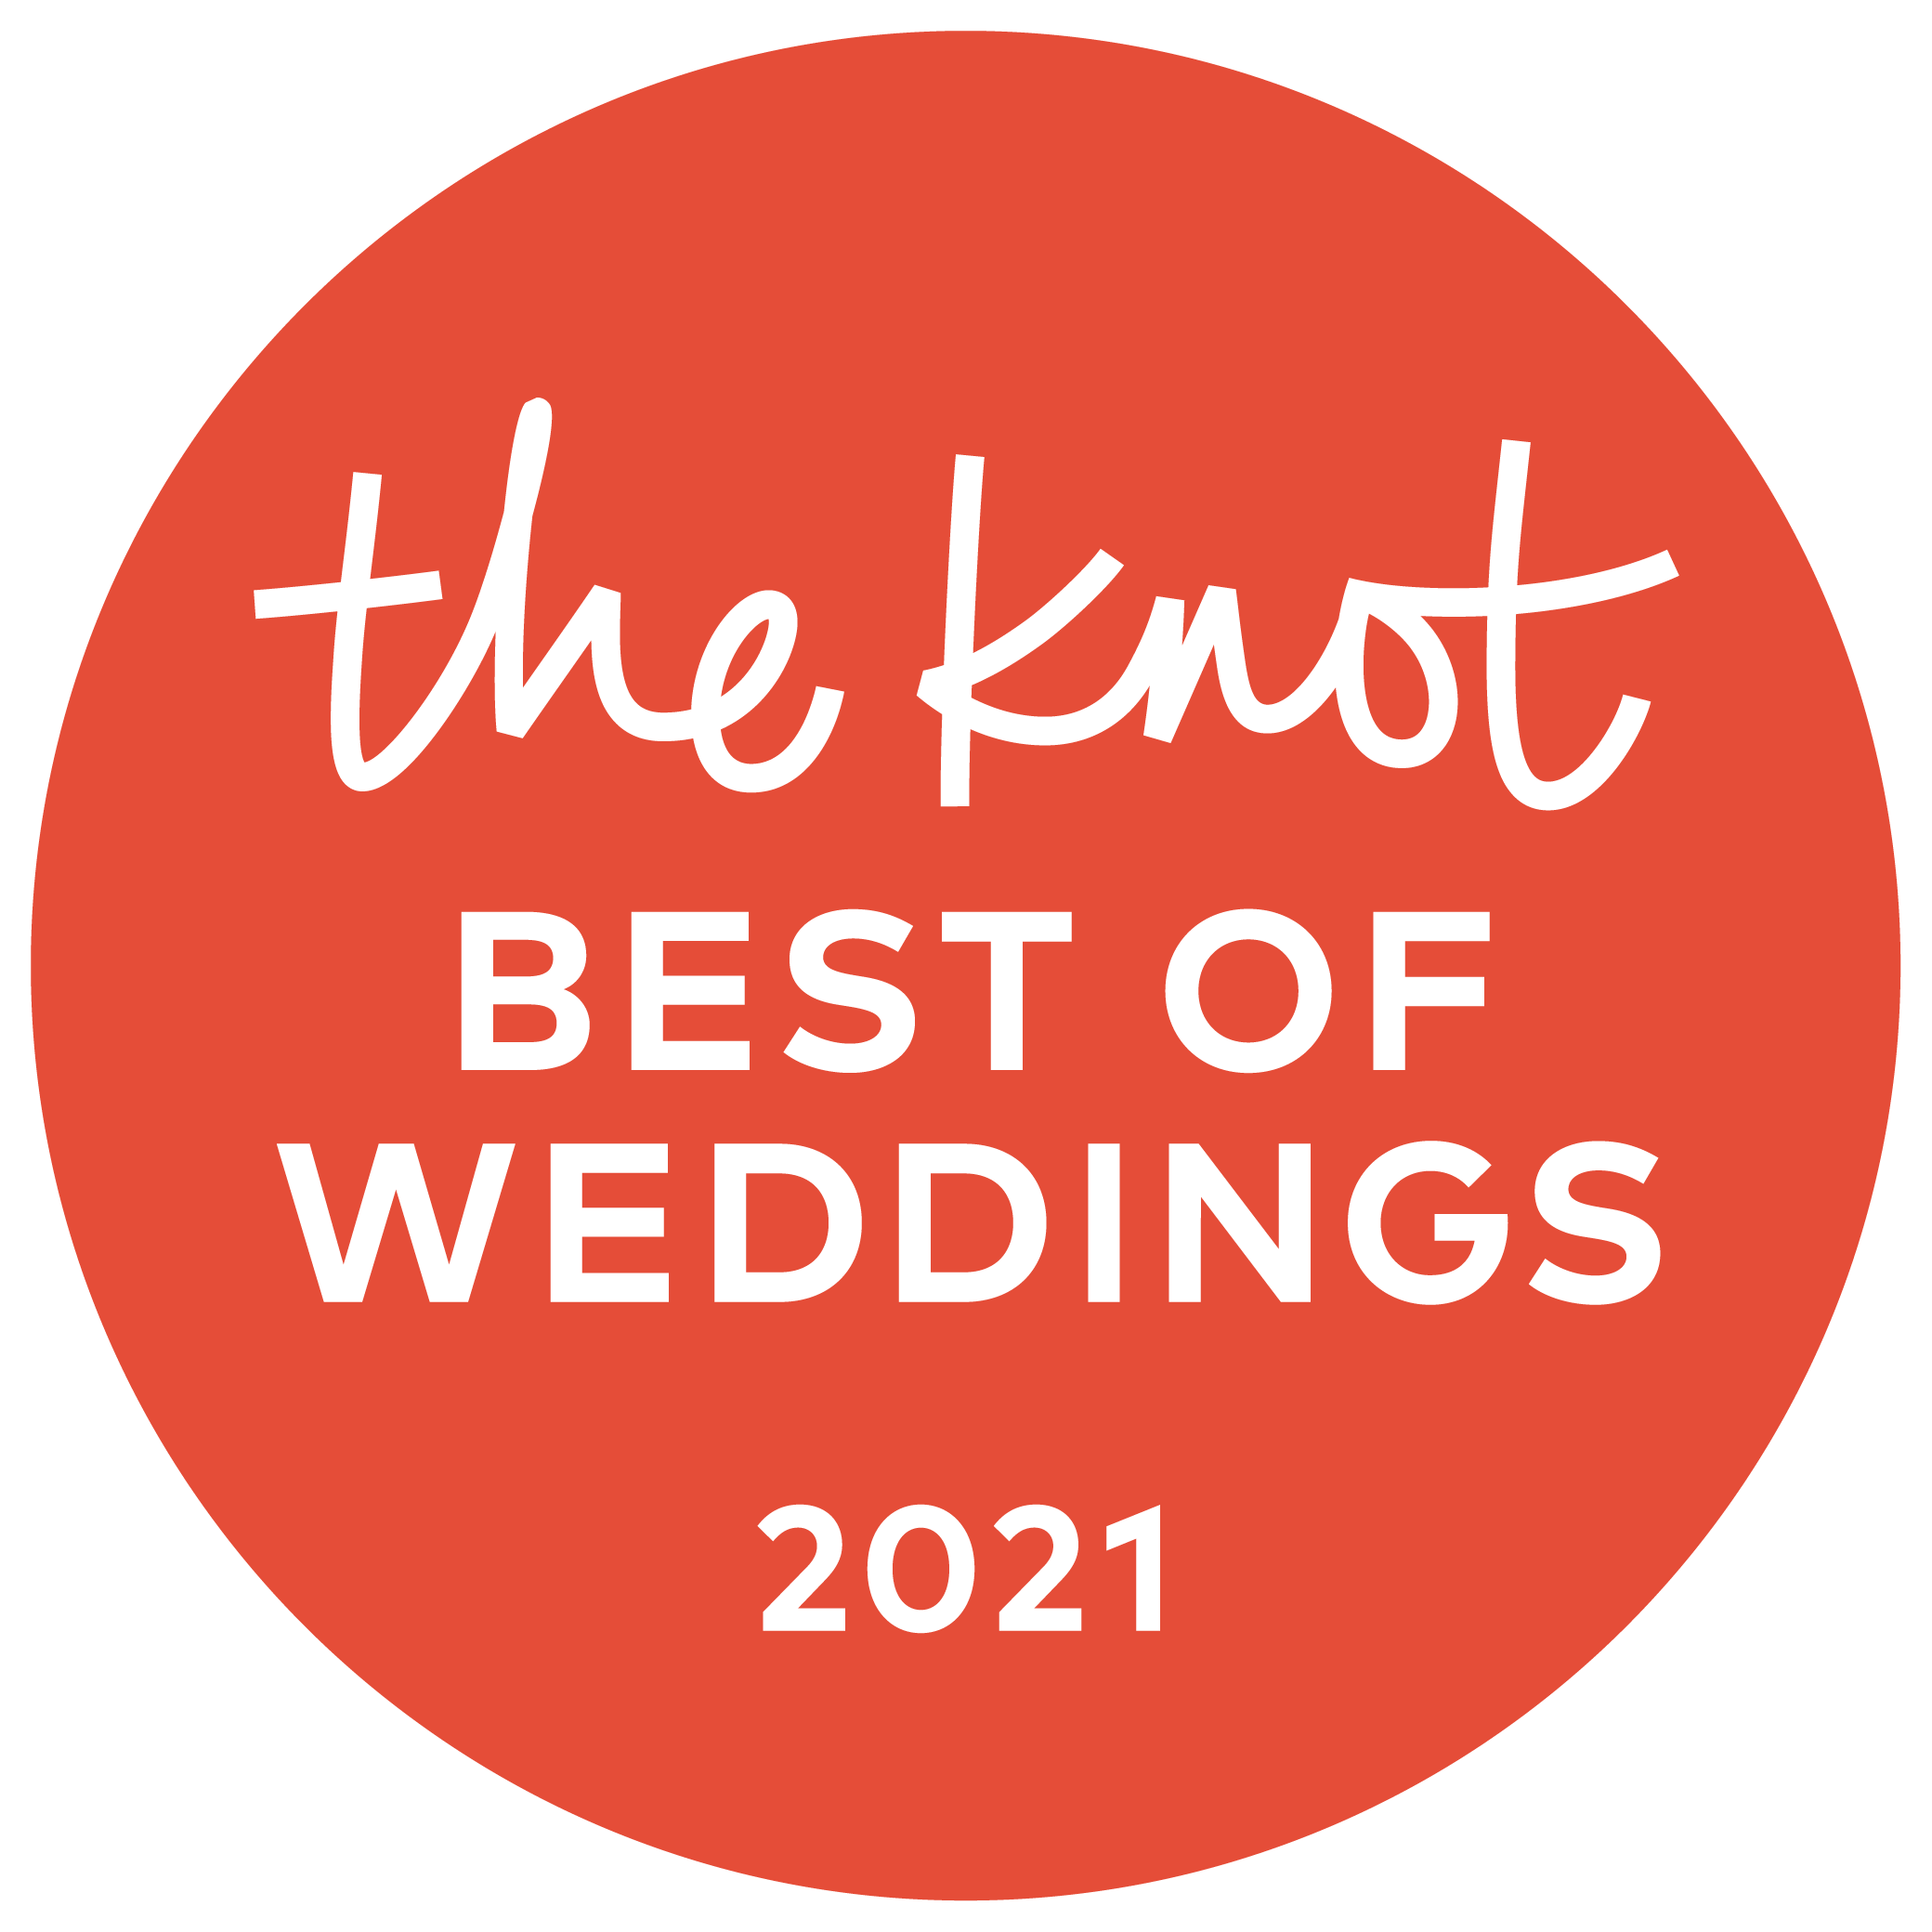 the-knot-best-of-weddings-2021-live-well-paint-often.png